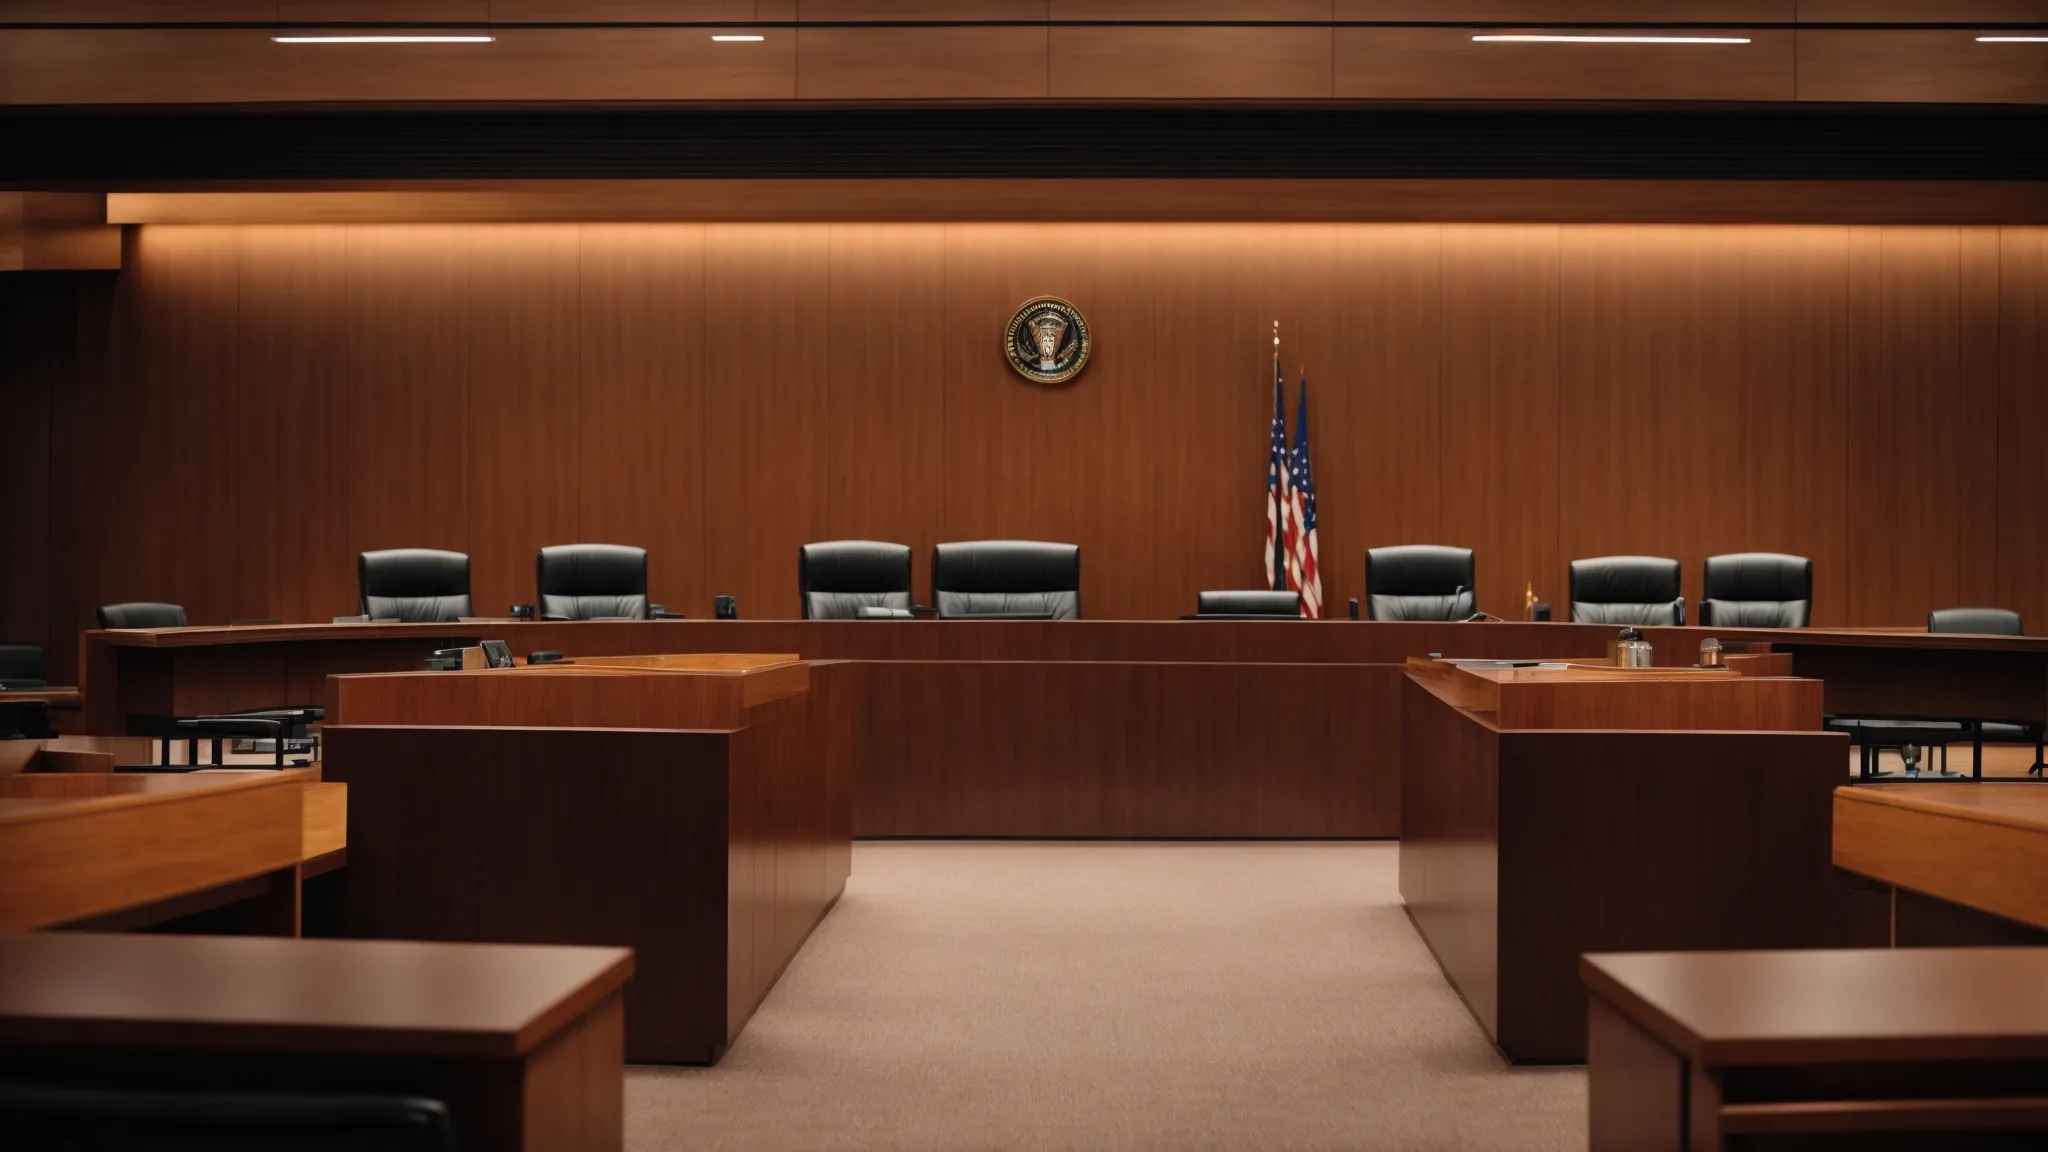 a wide-angle shot of a modern arbitration courtroom with an empty judge's bench, tribunal desks, and flagpoles without flags.